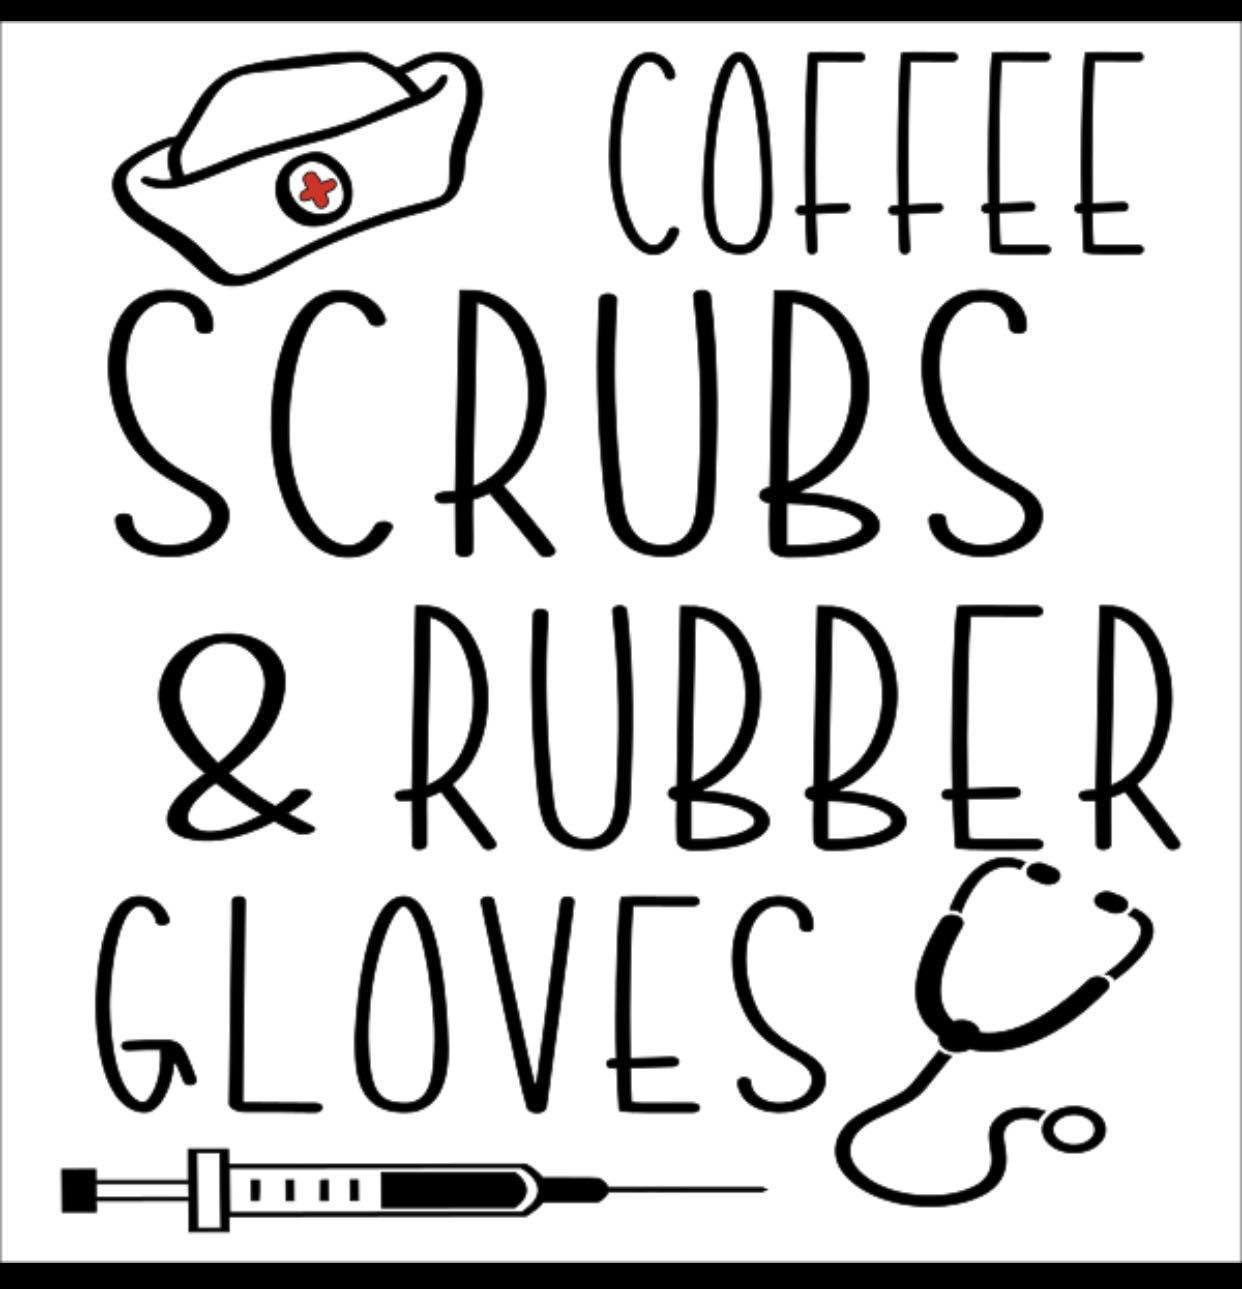 Scrubs and Gloves 12x12